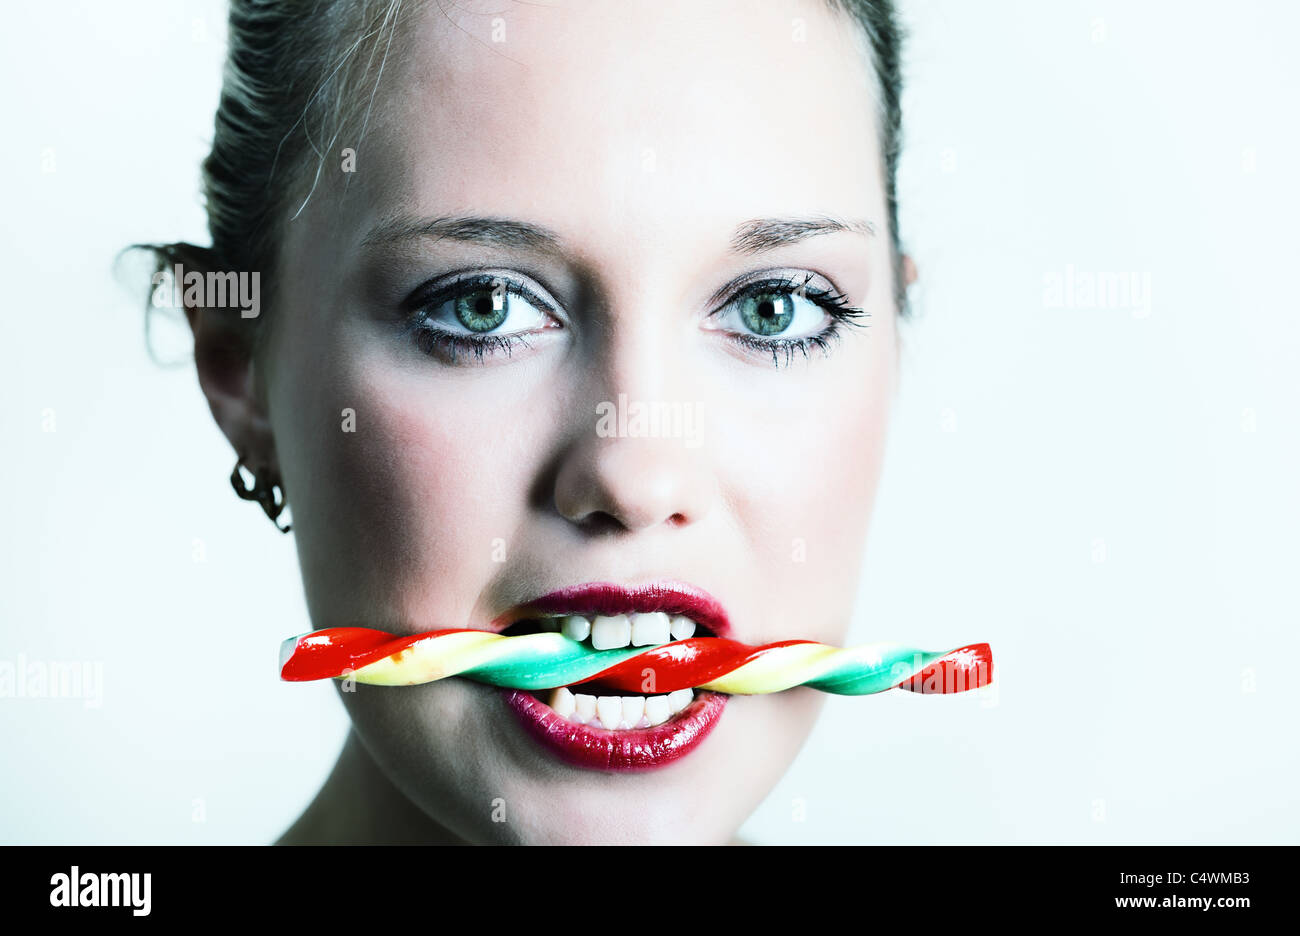 Portait of young woman holding colorful candy in her teeth Stock Photo